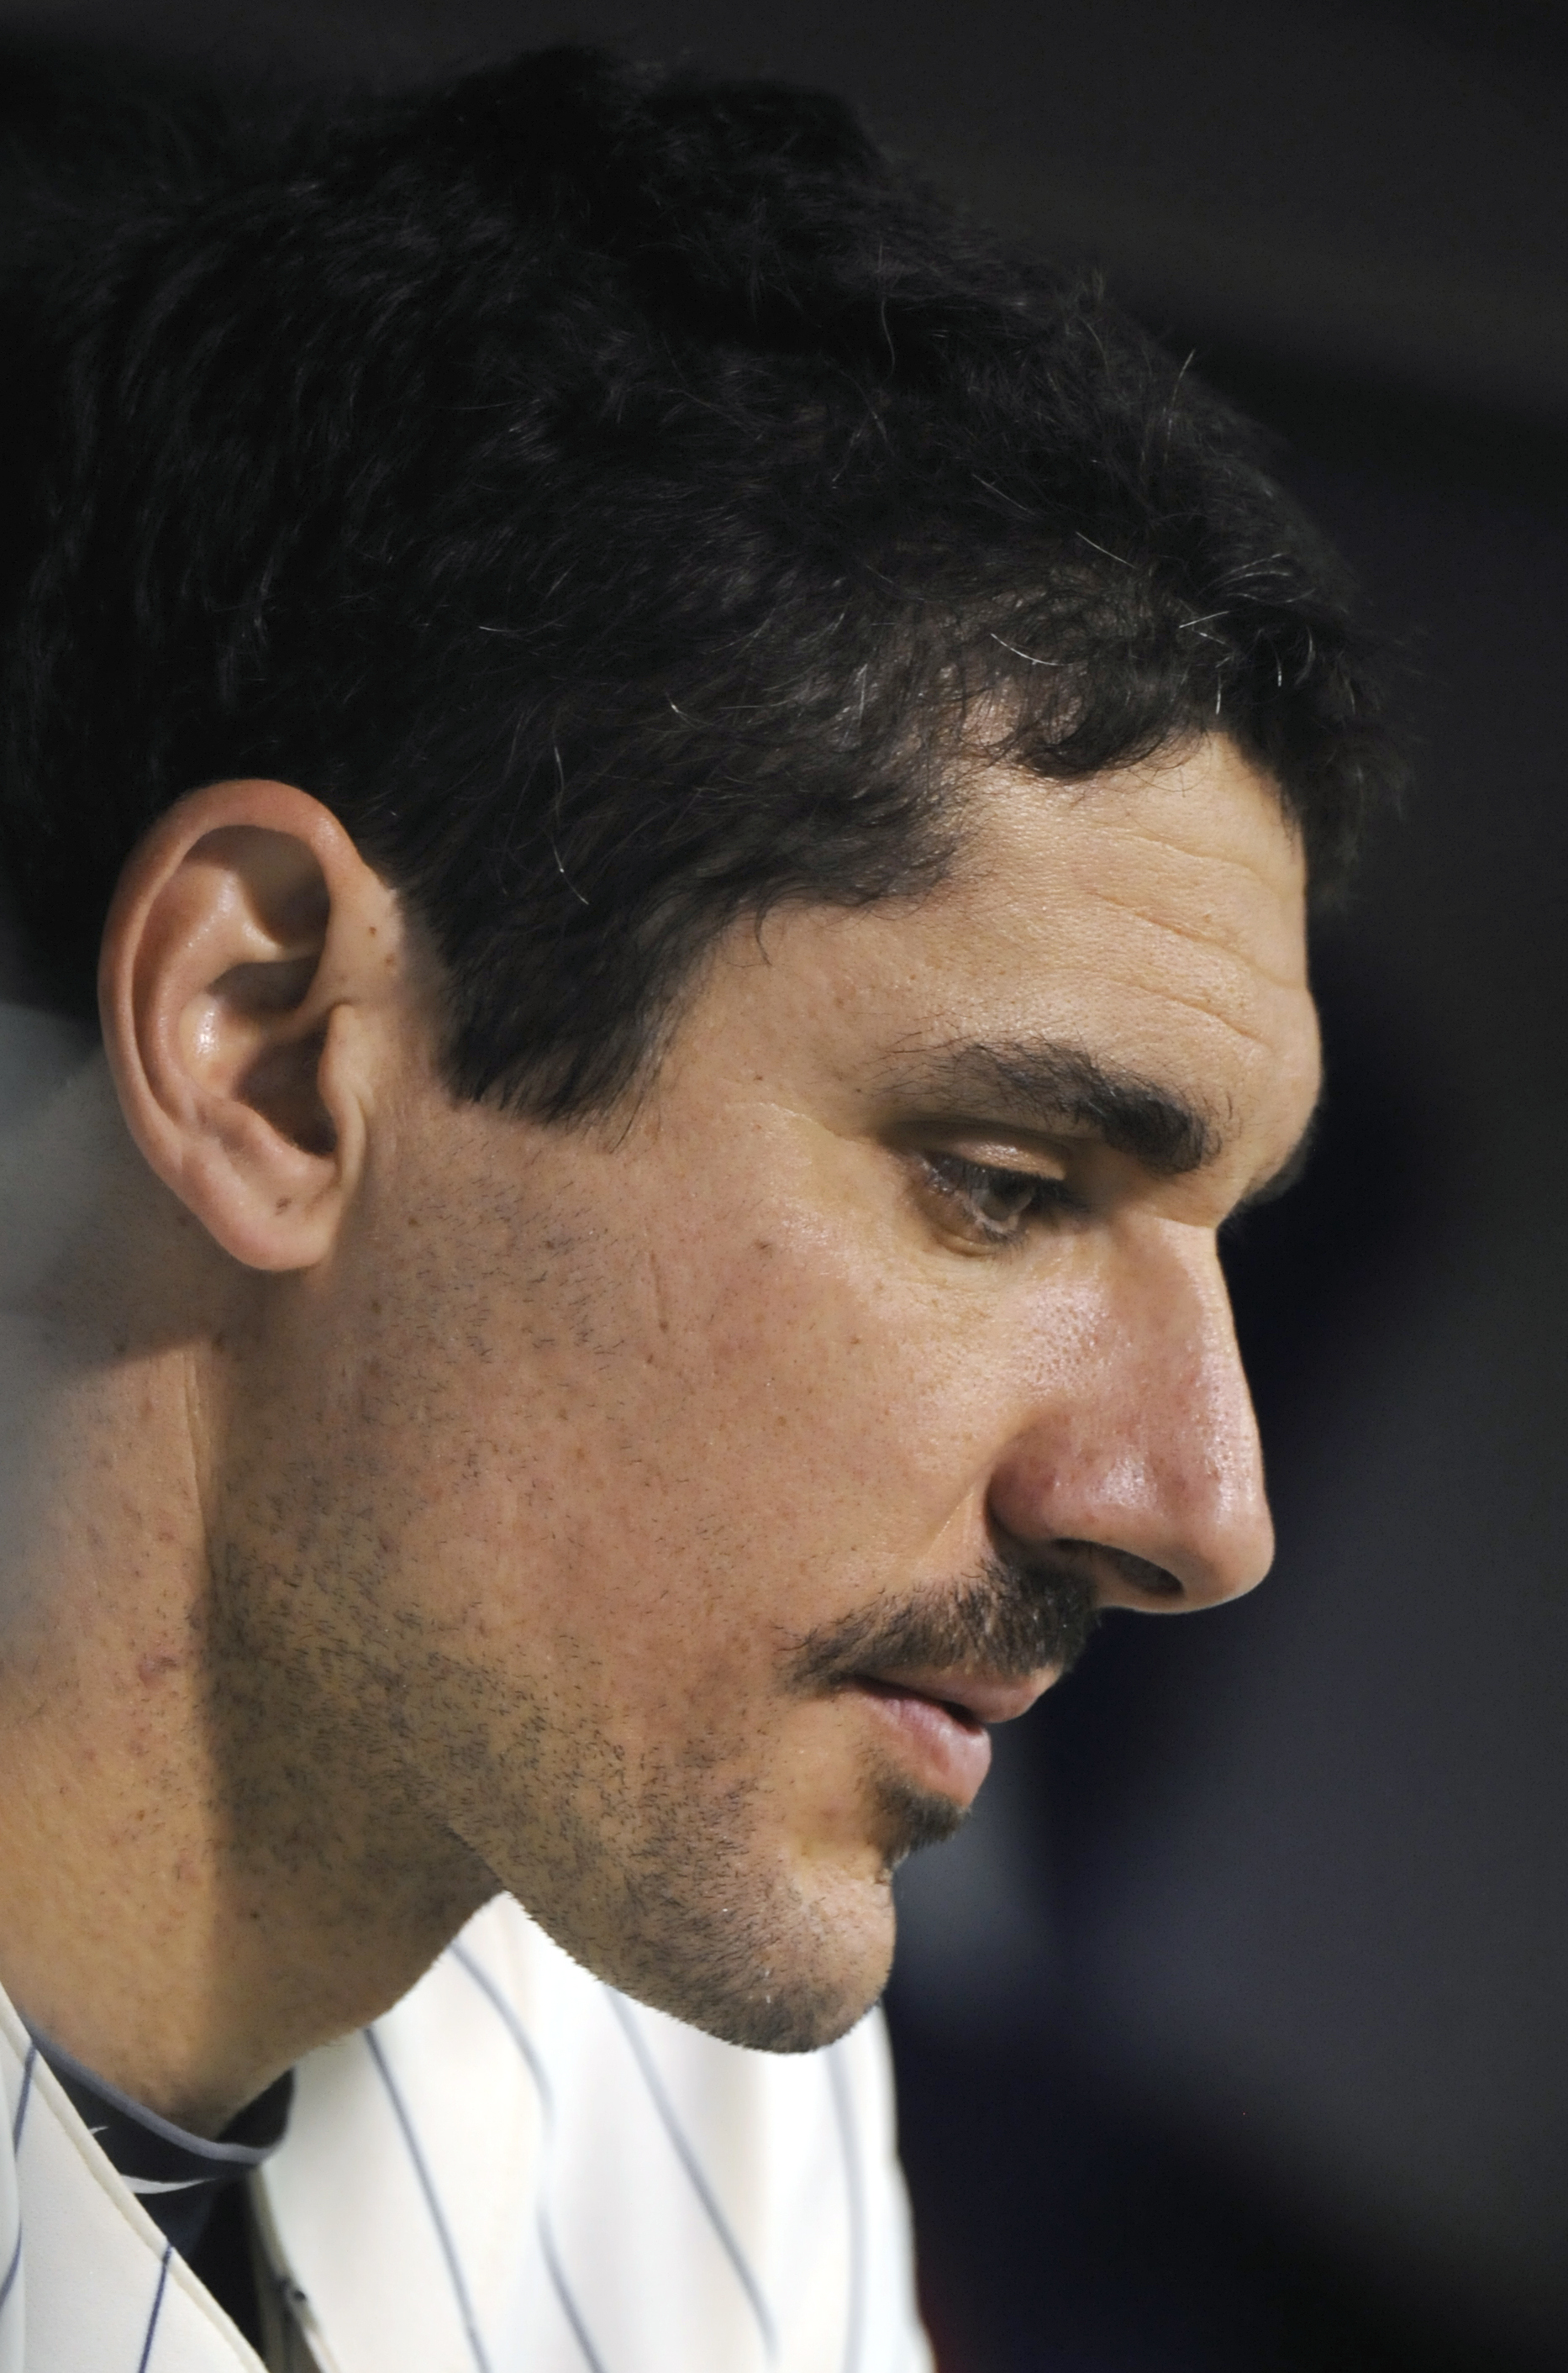 MINNEAPOLIS, MN - OCTOBER 7: Carl Pavano #48 of the Minnesota Twins in the dugout in the bottom of the seventh inning during game two of the ALDS game against the New York Yankees on October 7, 2010 at Target Field in Minneapolis, Minnesota. (Photo by Han